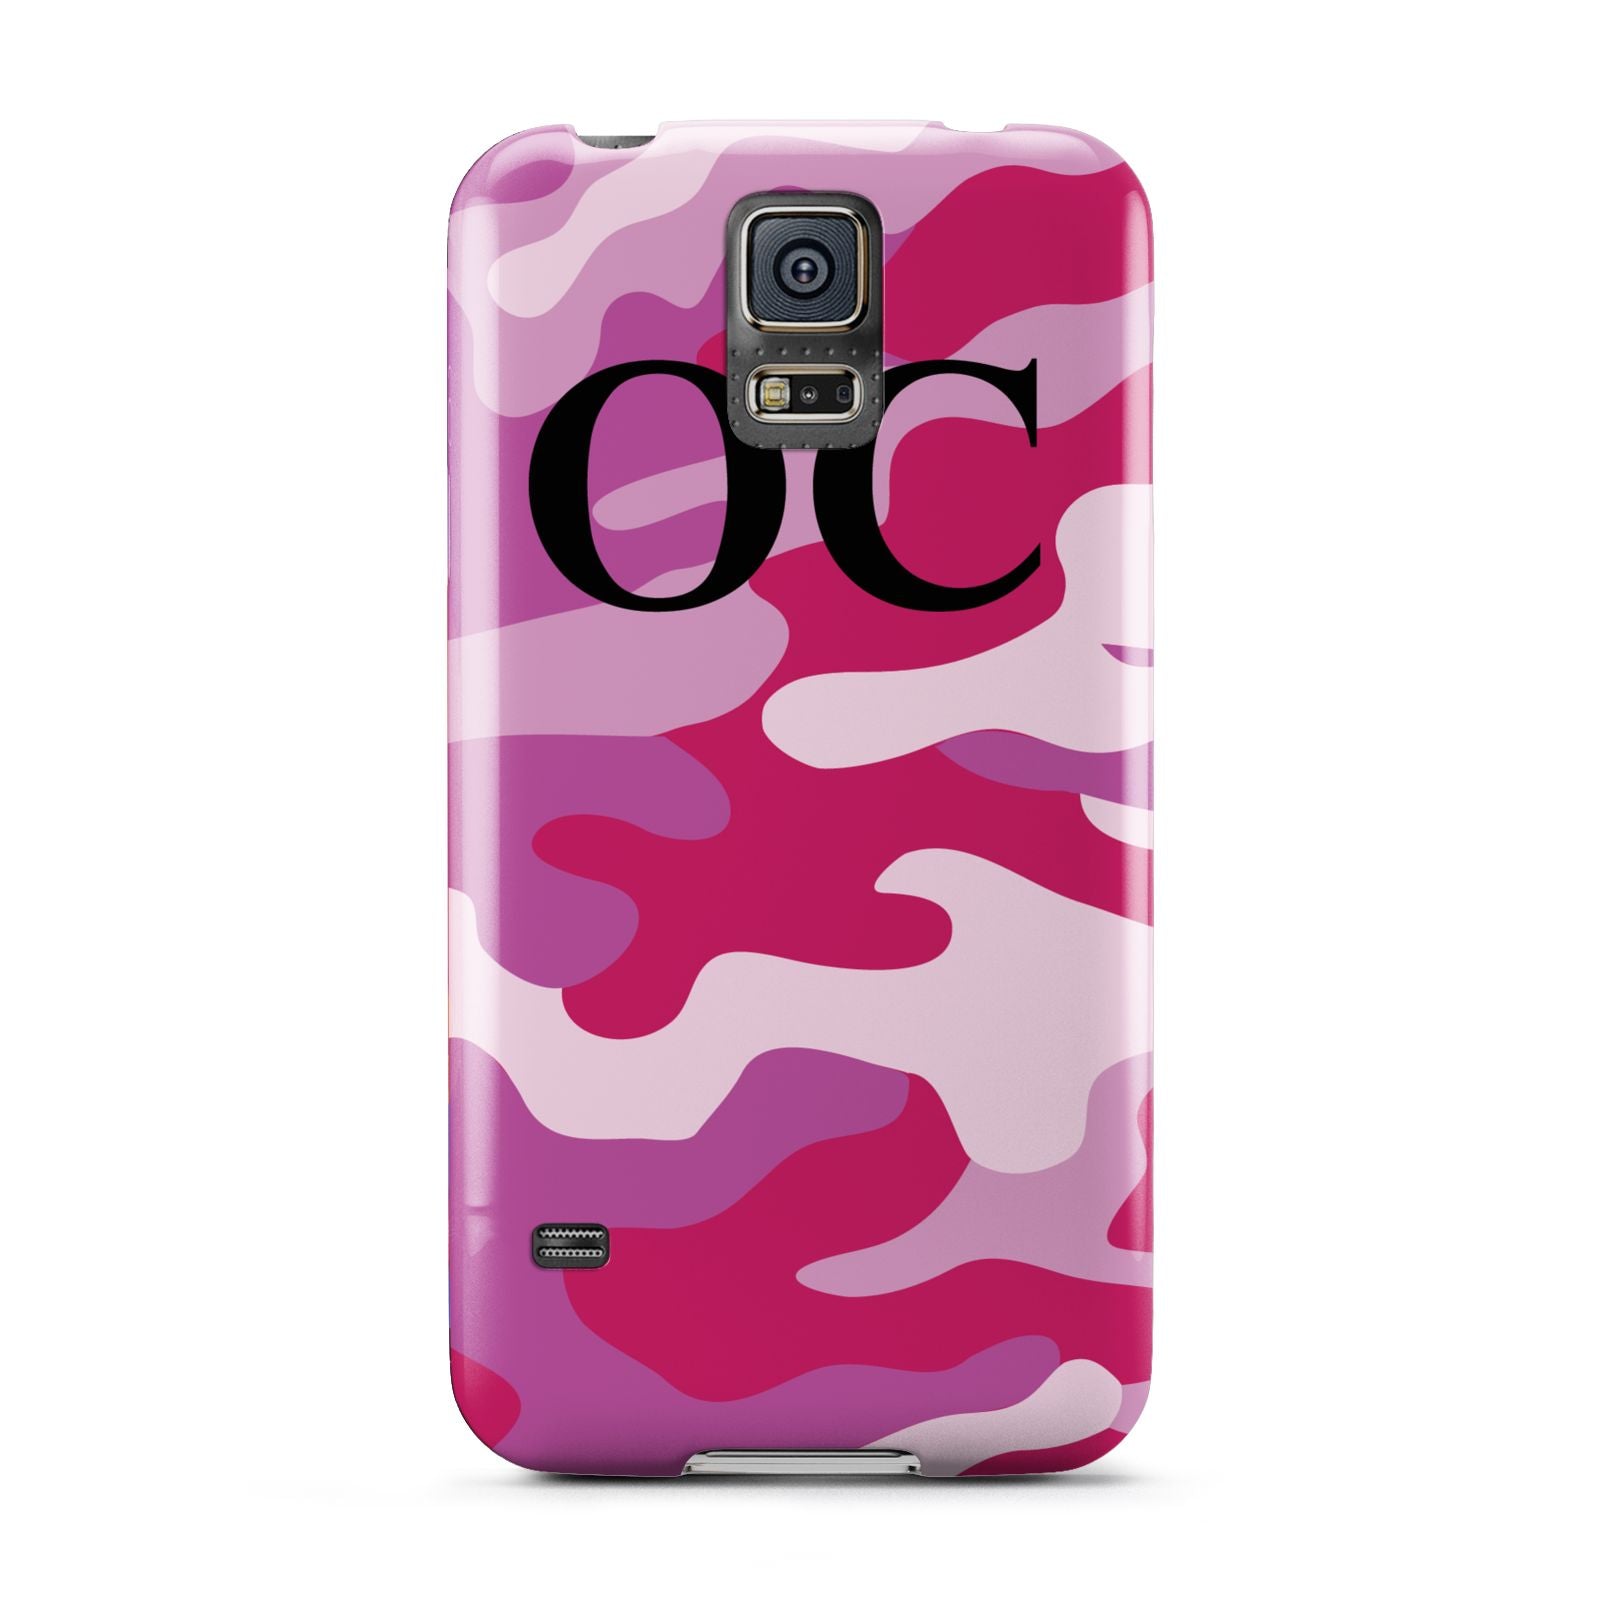 Camouflage Personalised Samsung Galaxy S5 Case